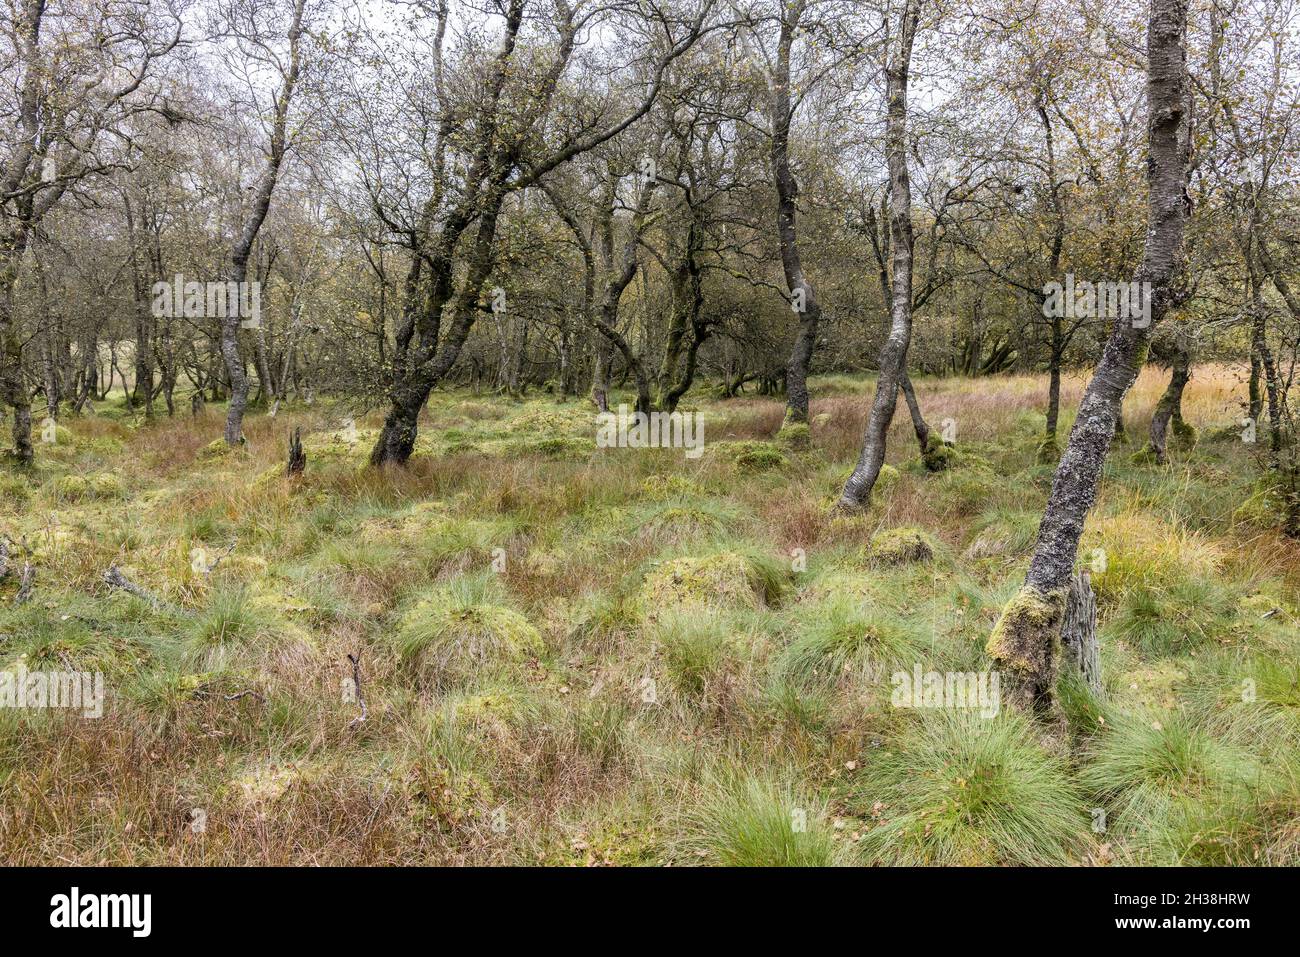 Grass tussocks in deciduous copse on the boardwalk, Malham Tarn nature reserve, Yorkshire Dales, UK Stock Photo